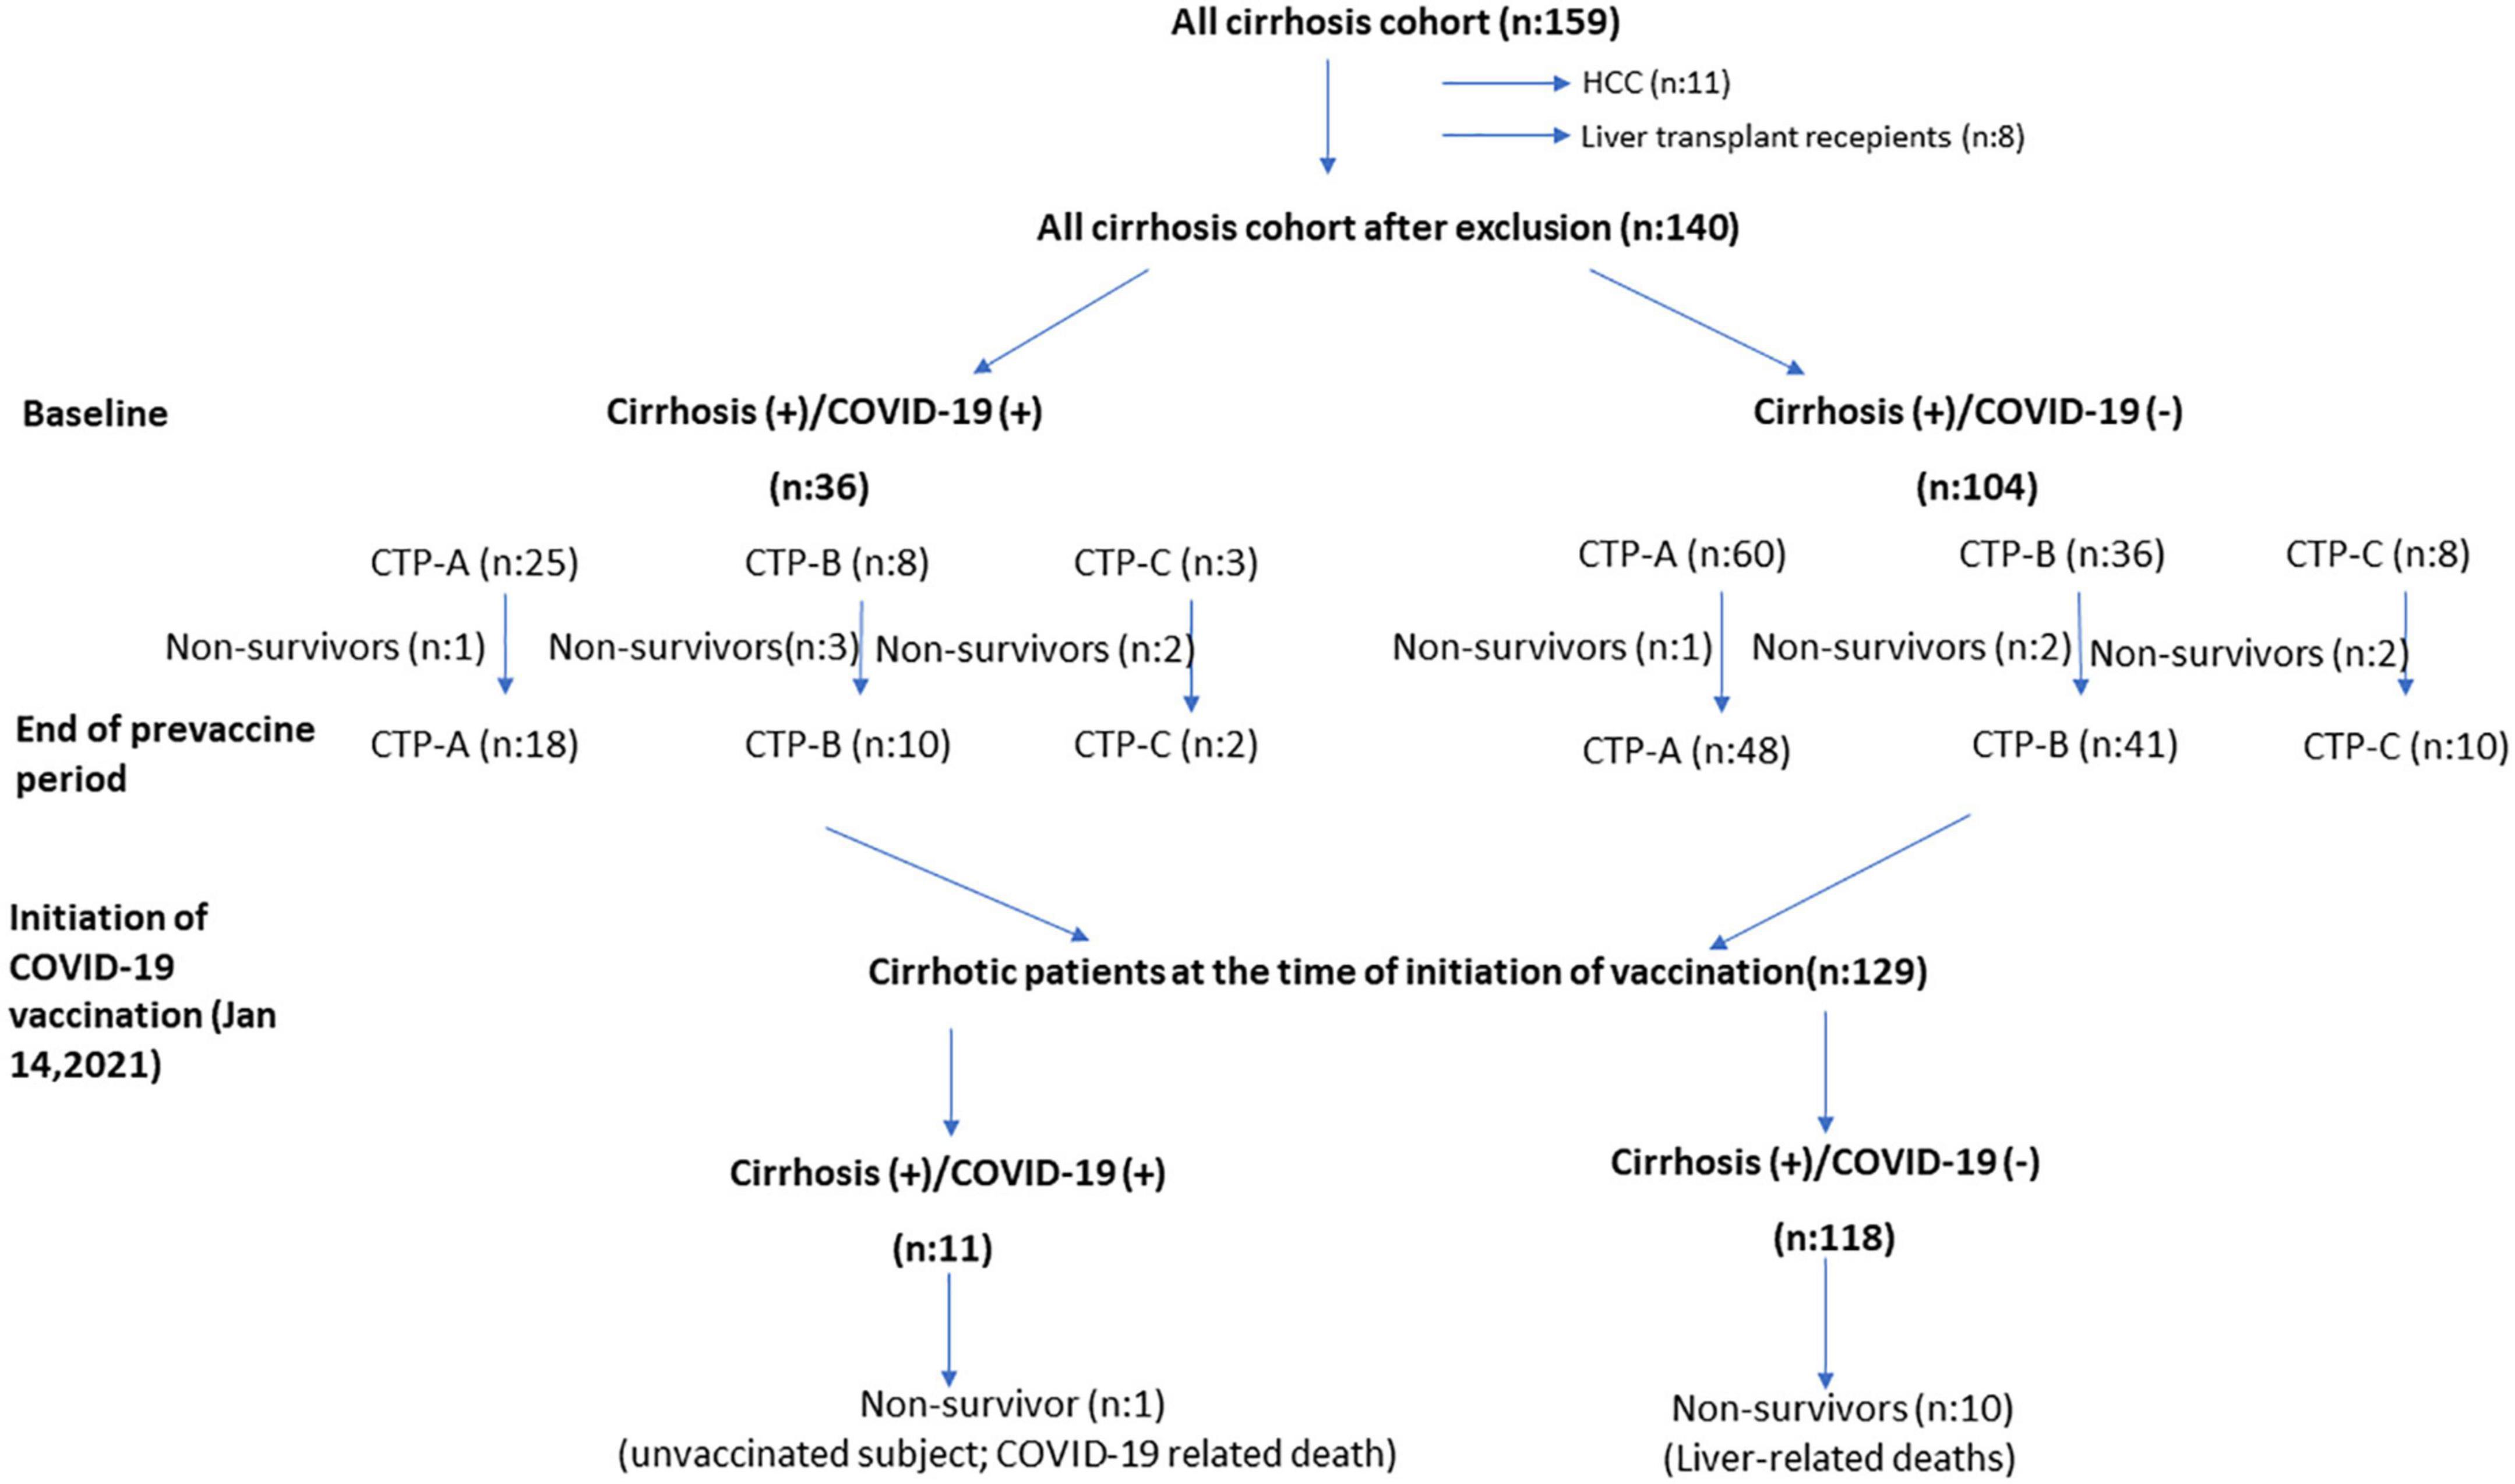 The impact of COVID-19 disease on the natural course of cirrhosis: Before and after starting vaccination